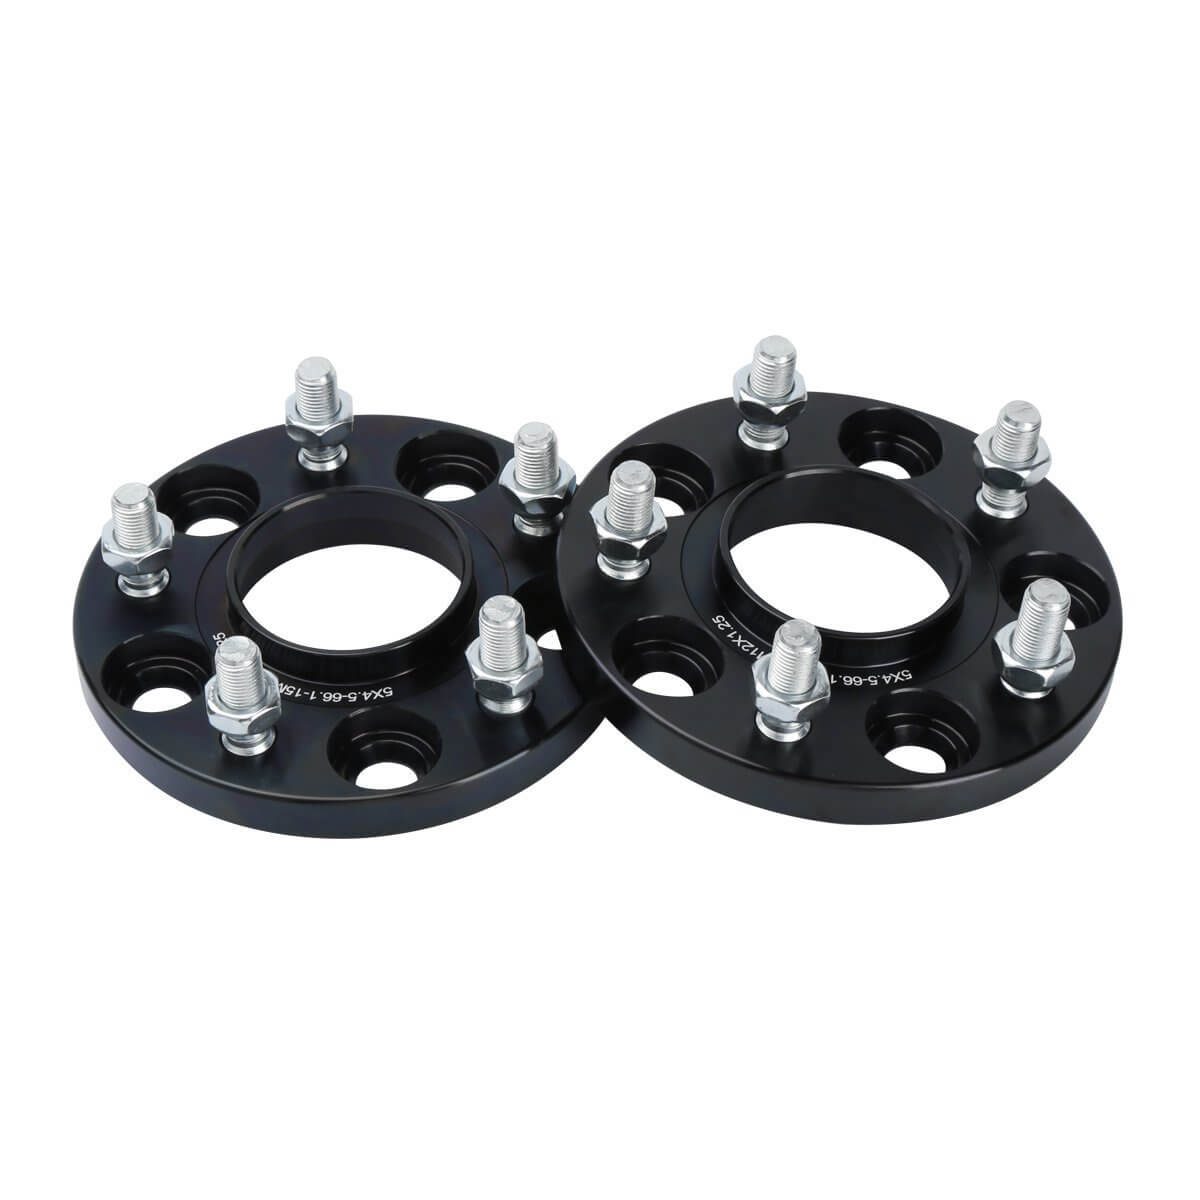 Hubcentric Wheel Spacers 15mm 5x4.5 For Nissan 350Z 370Z Altima Sentra xccscss.